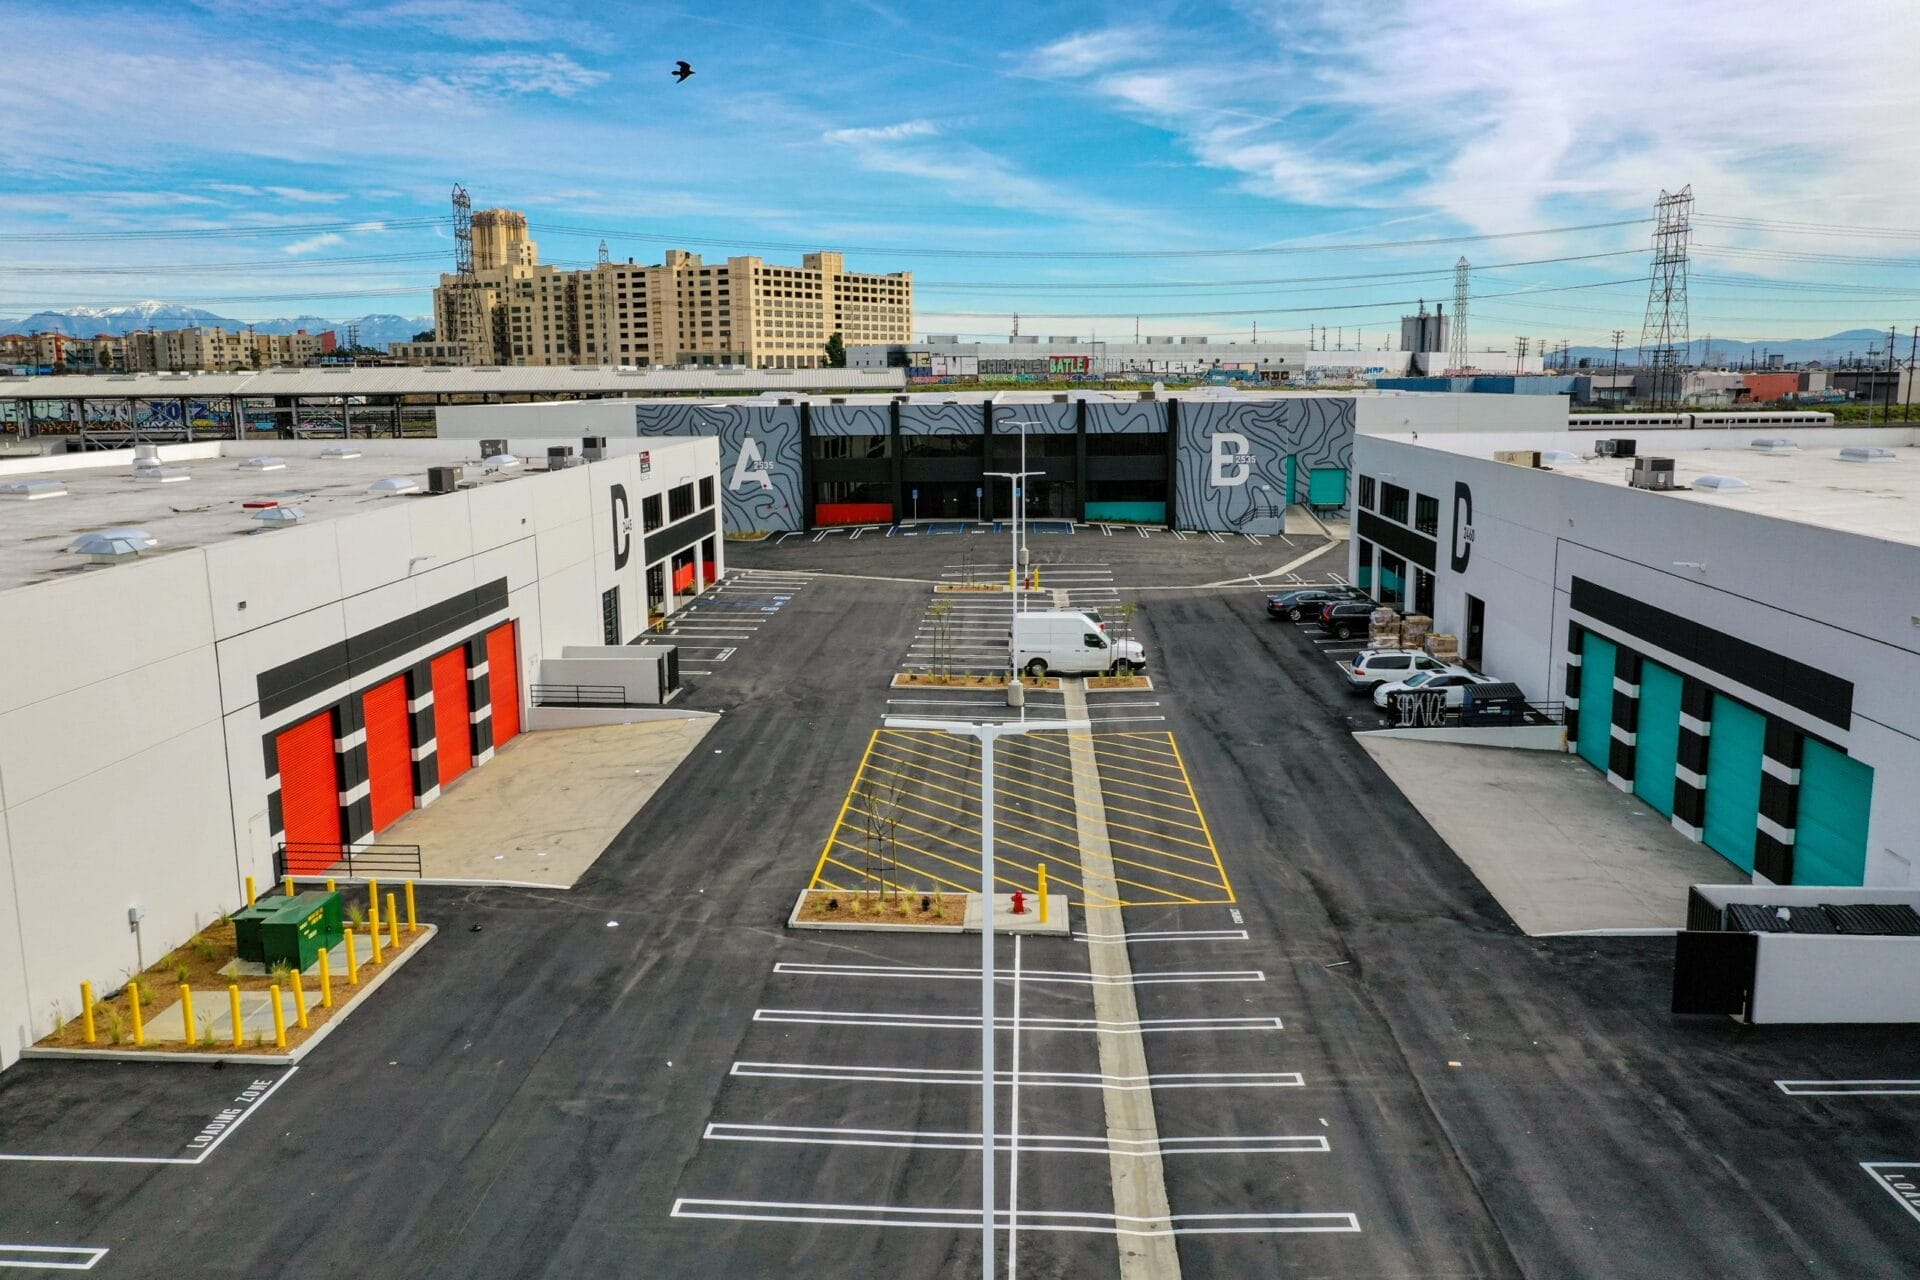 The BoxYard in DTLA Signs More Digital-To-Consumer Companies Combining Warehousing, Digital Content Creation, Marketing and Fulfillment Under One Roof